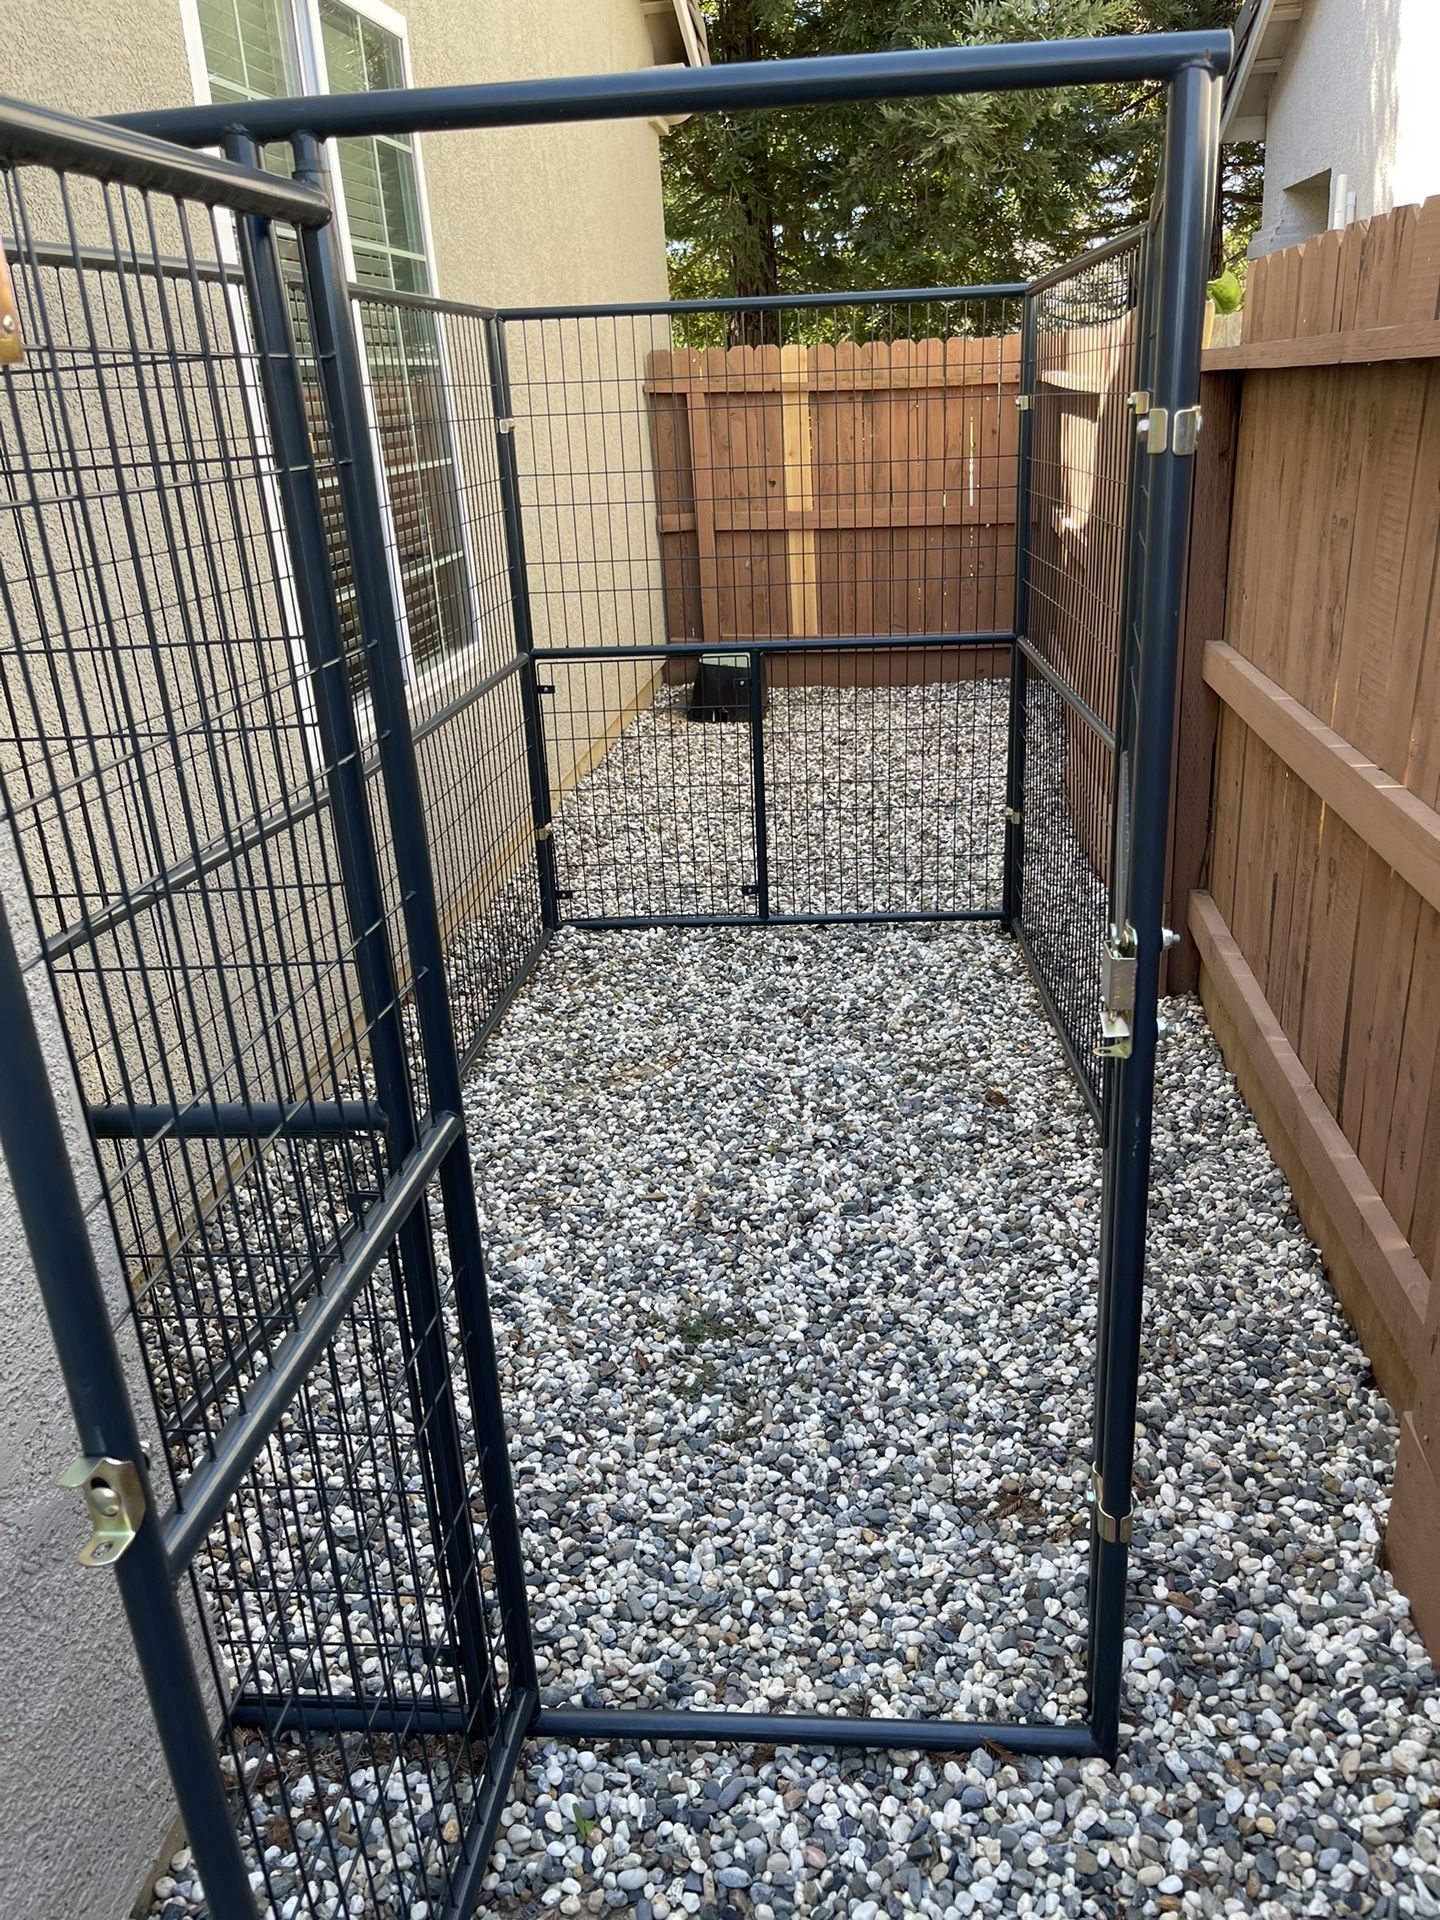 Retriever Outdoor Dog Kennel - 6 ft. x 5 ft. x 10 ft